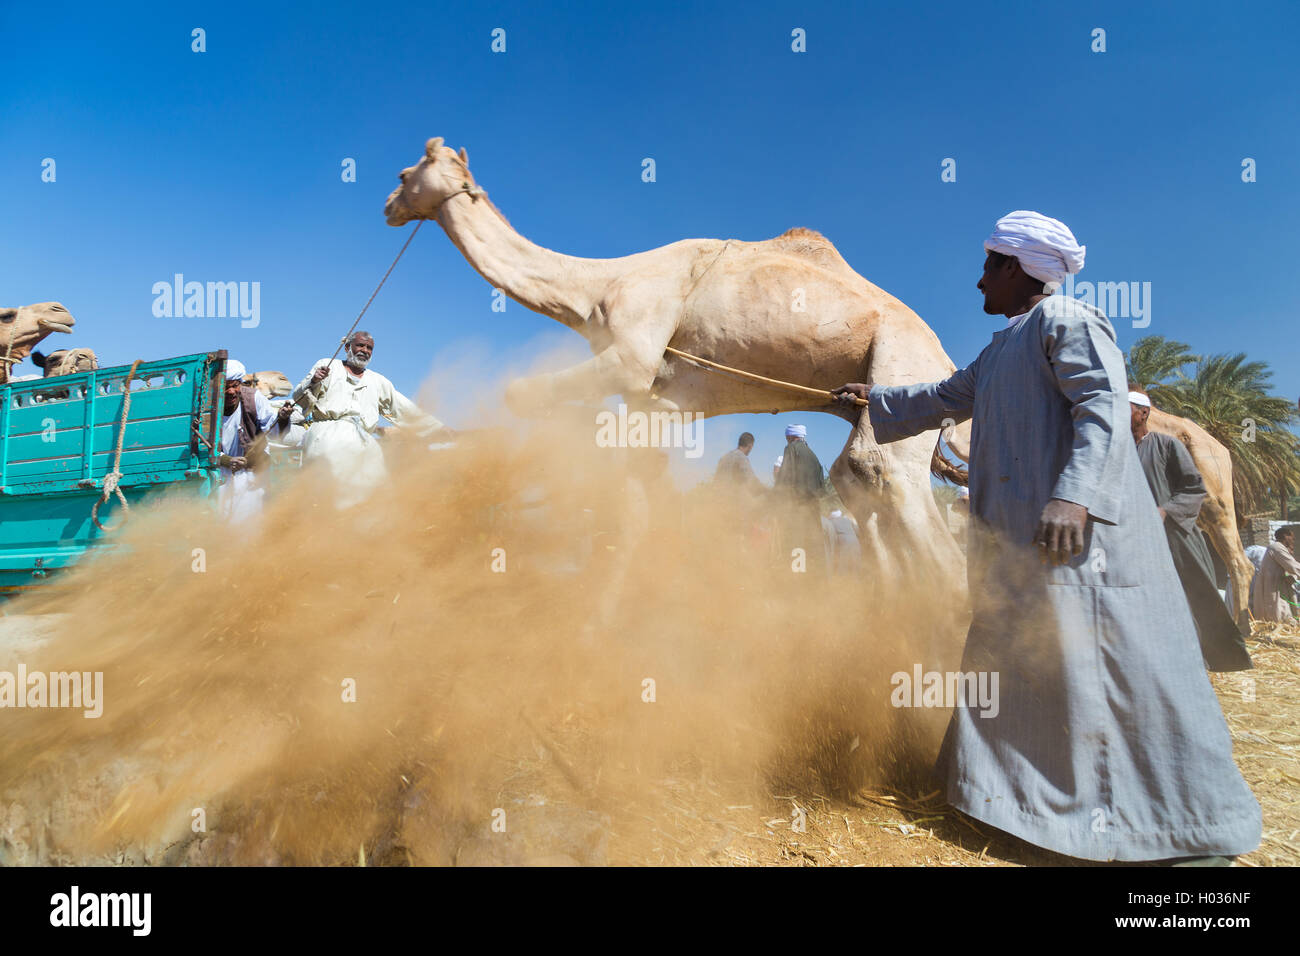 DARAW, EGYPT - FEBRUARY 6, 2016: Local camel salesmen on Camel market loading camels to trucks. Stock Photo